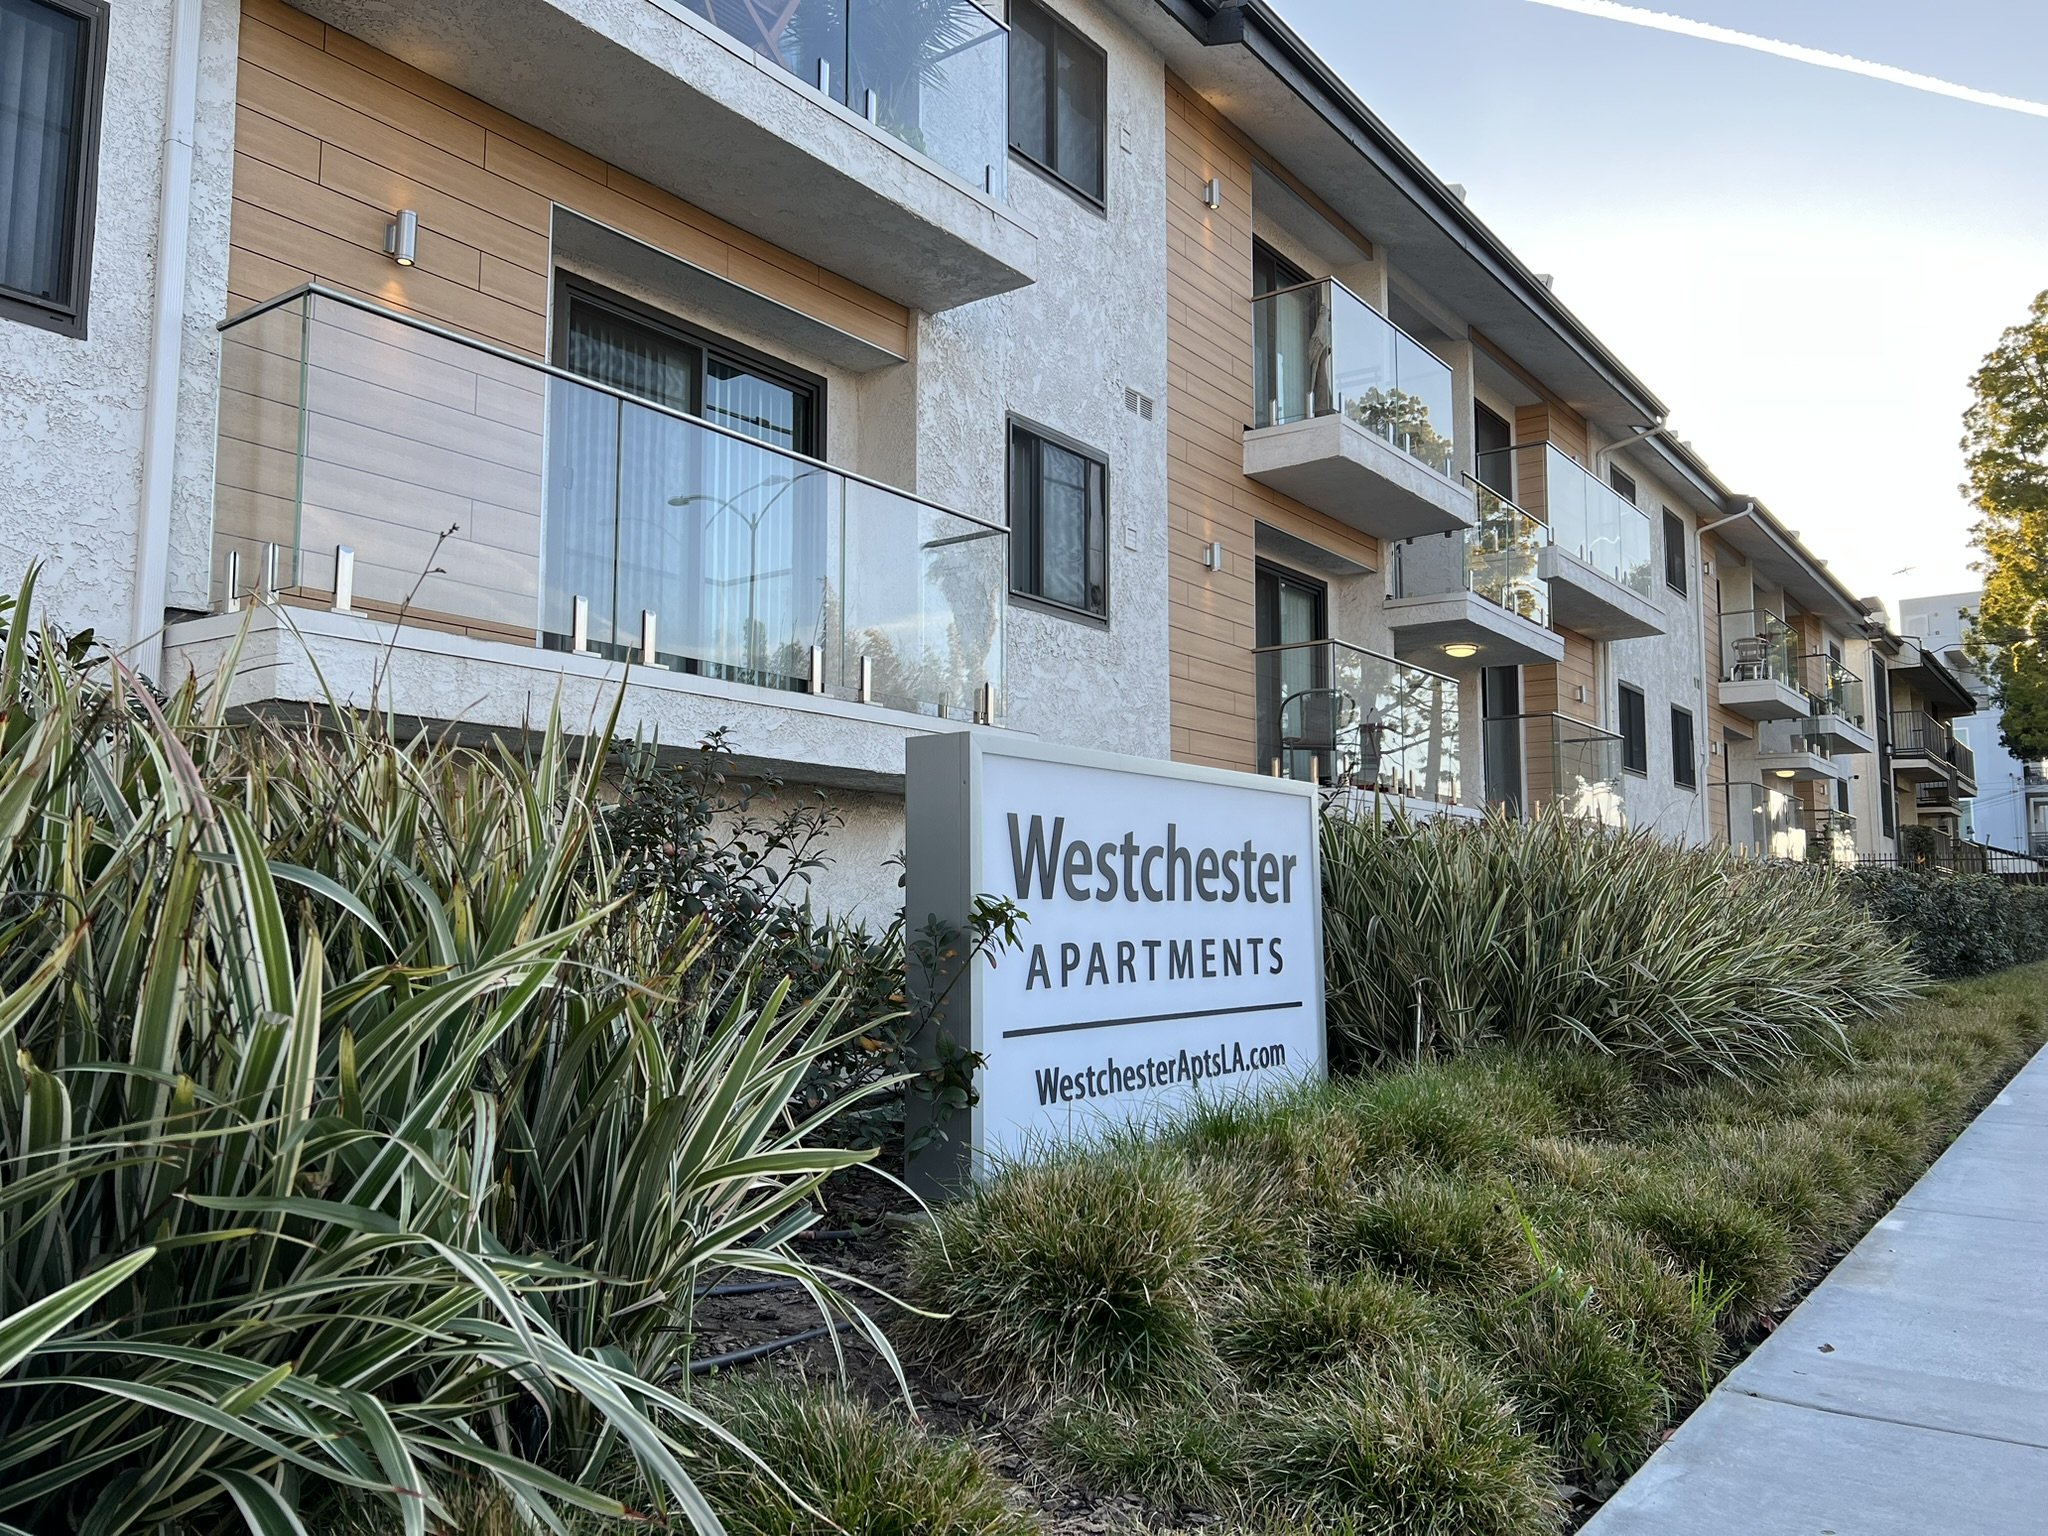 The Westchester Apartments